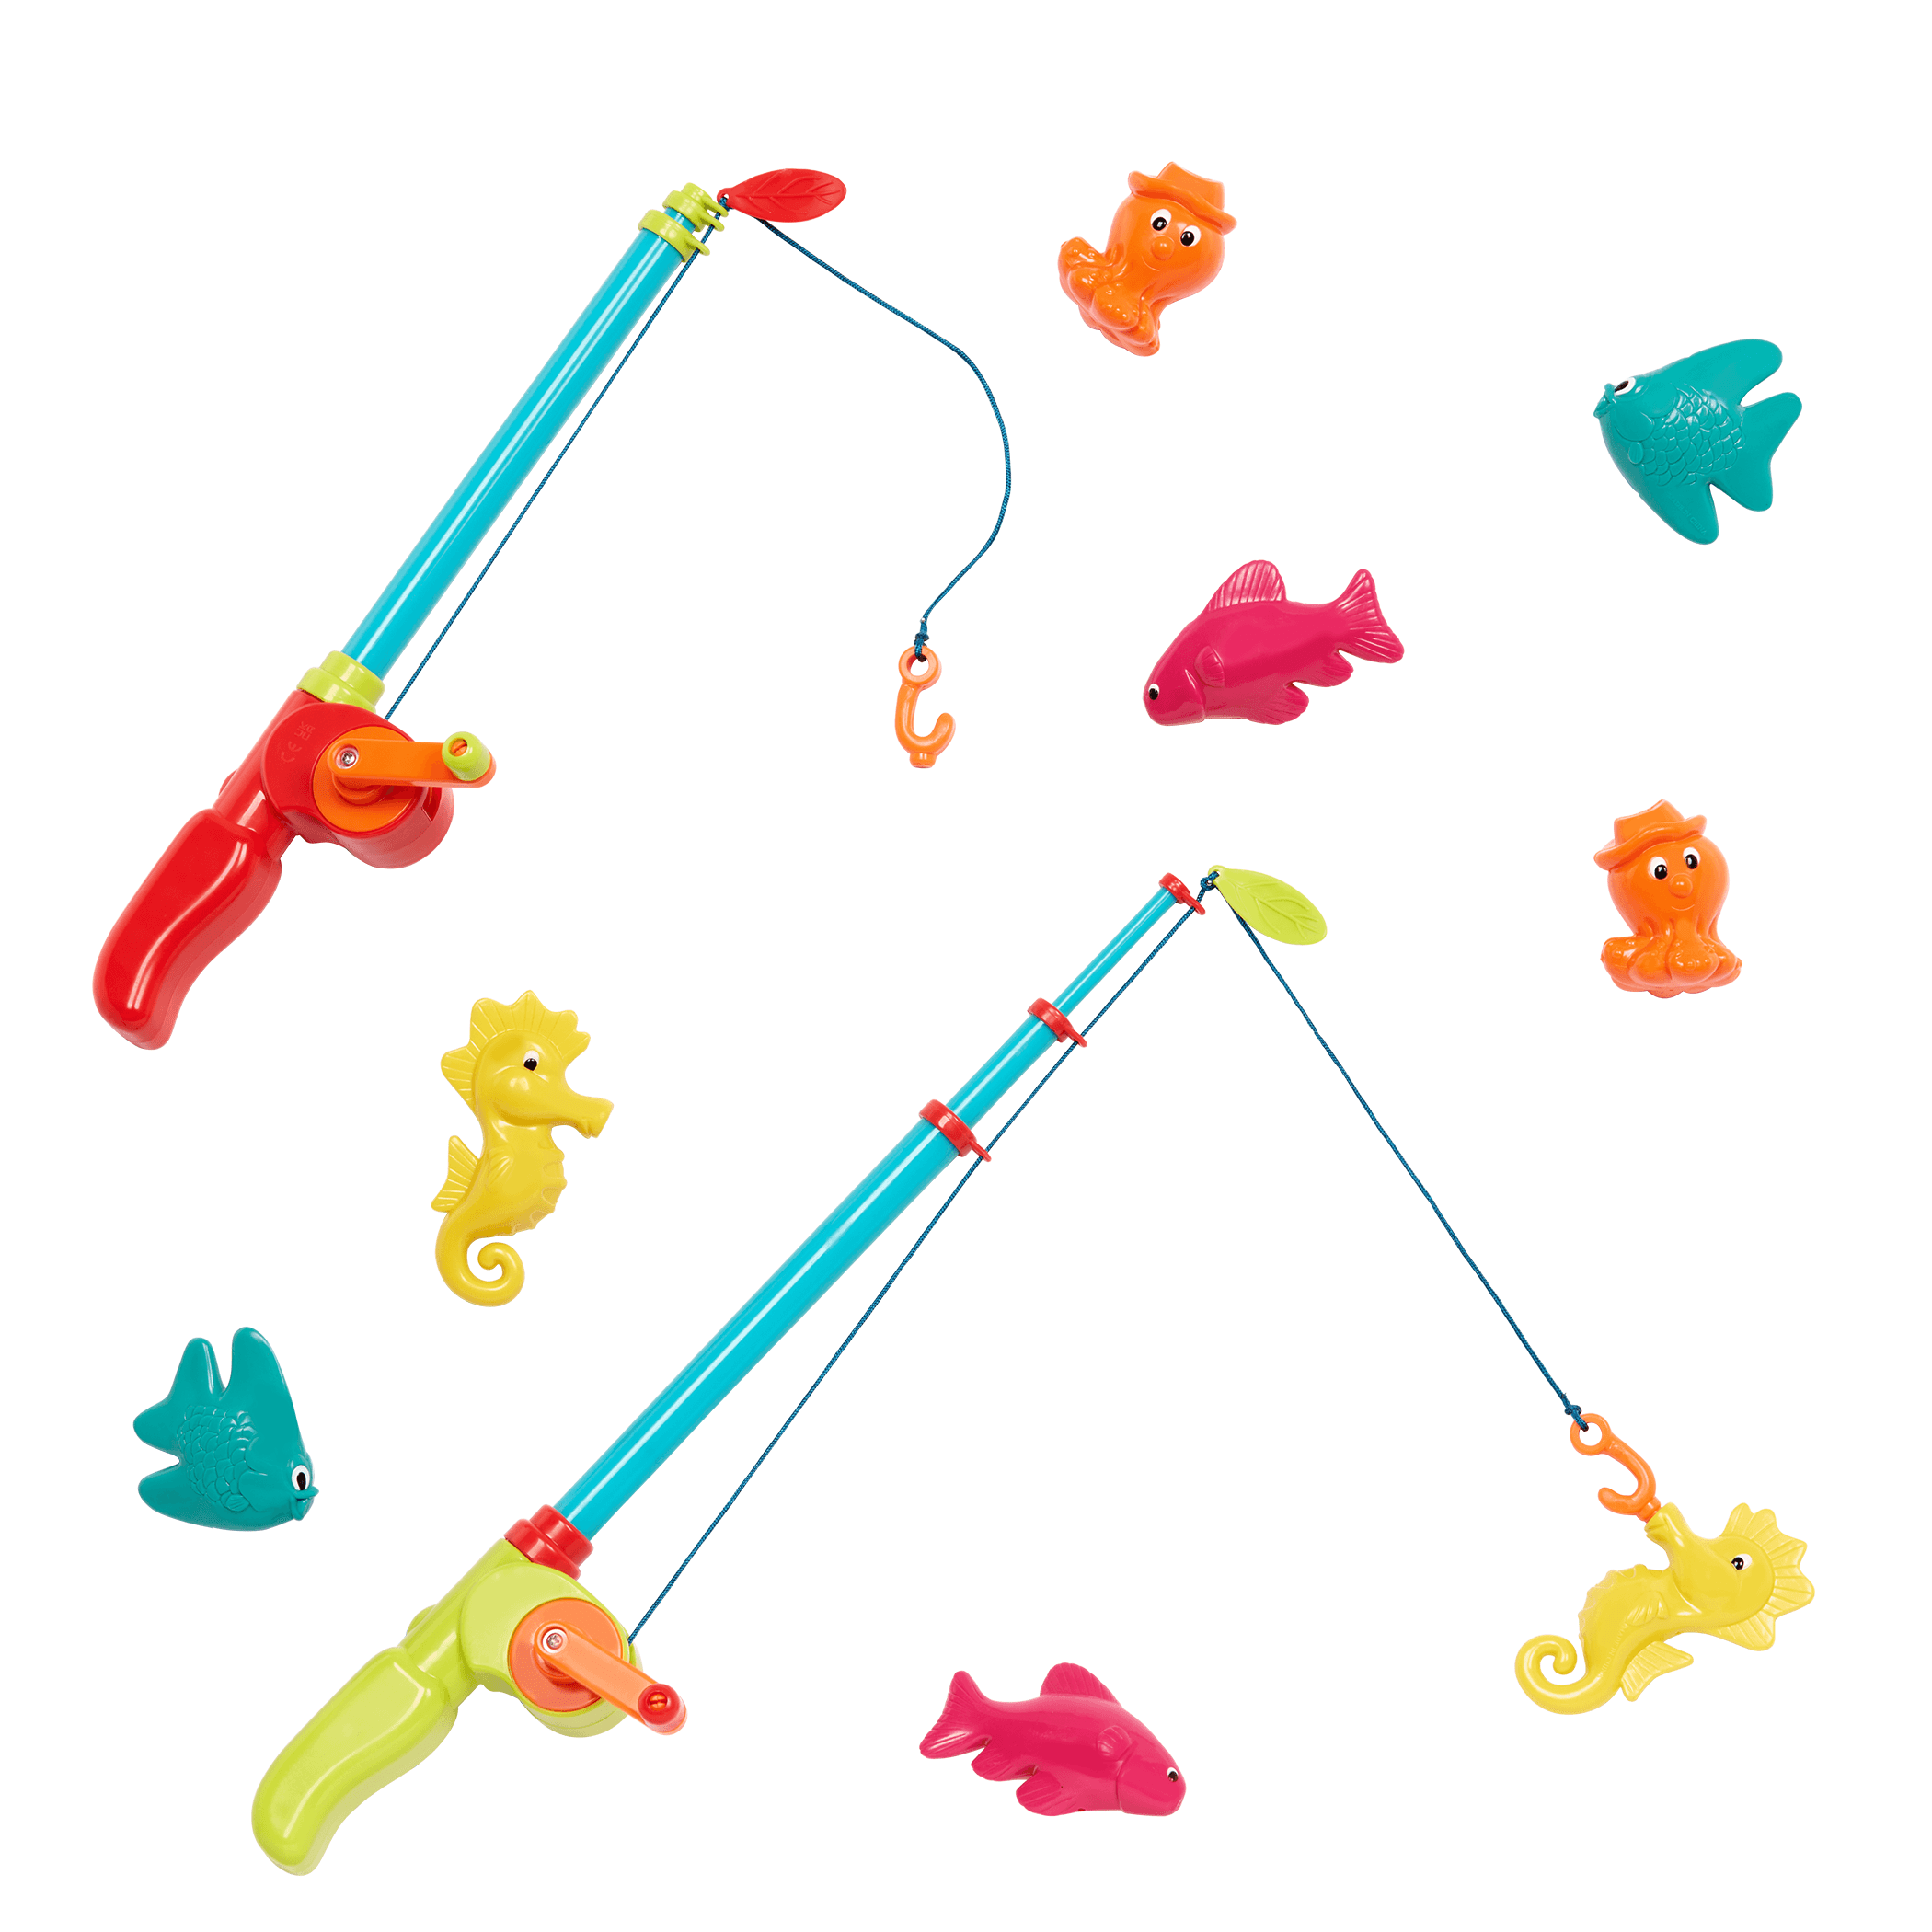 B.Toys: Little Fisher's fishing kit in a tube